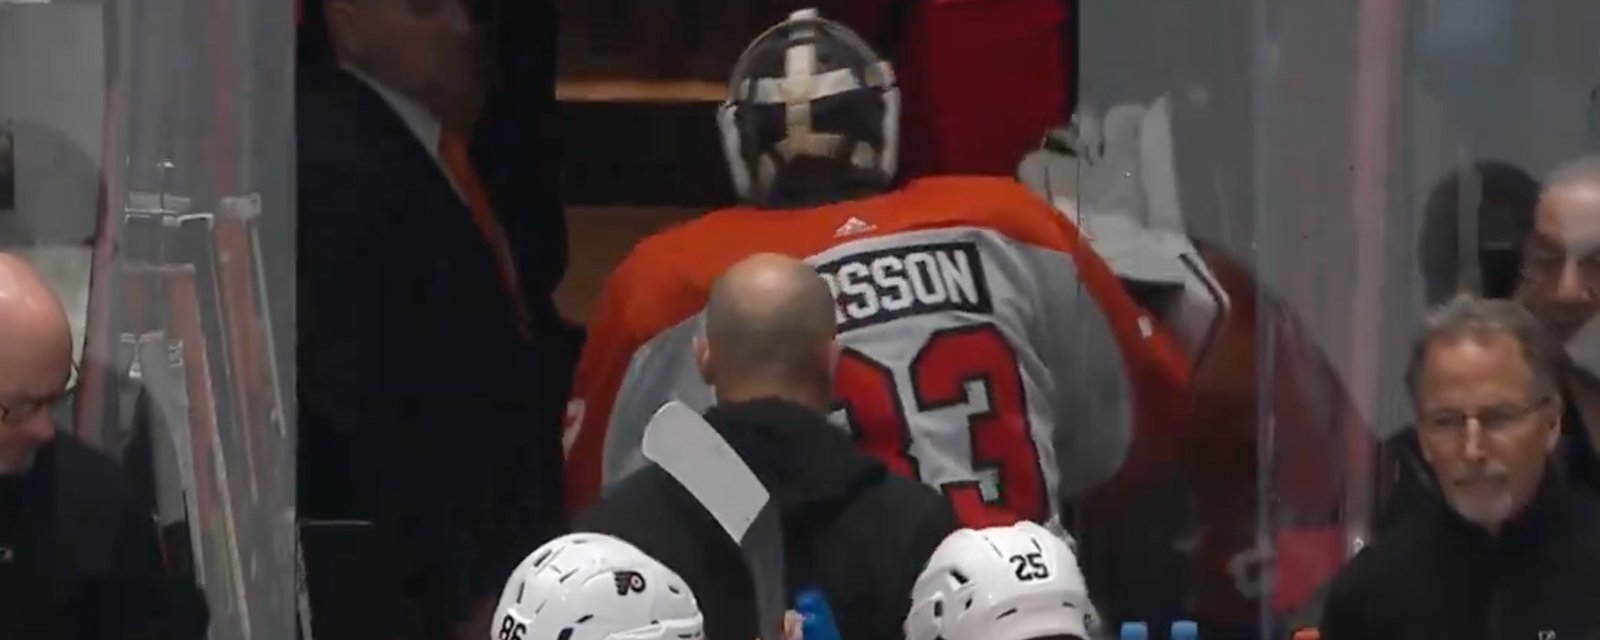 Flyers goalie Samuel Ersson leaves last night’s game with mystery injury that later stuns fans!